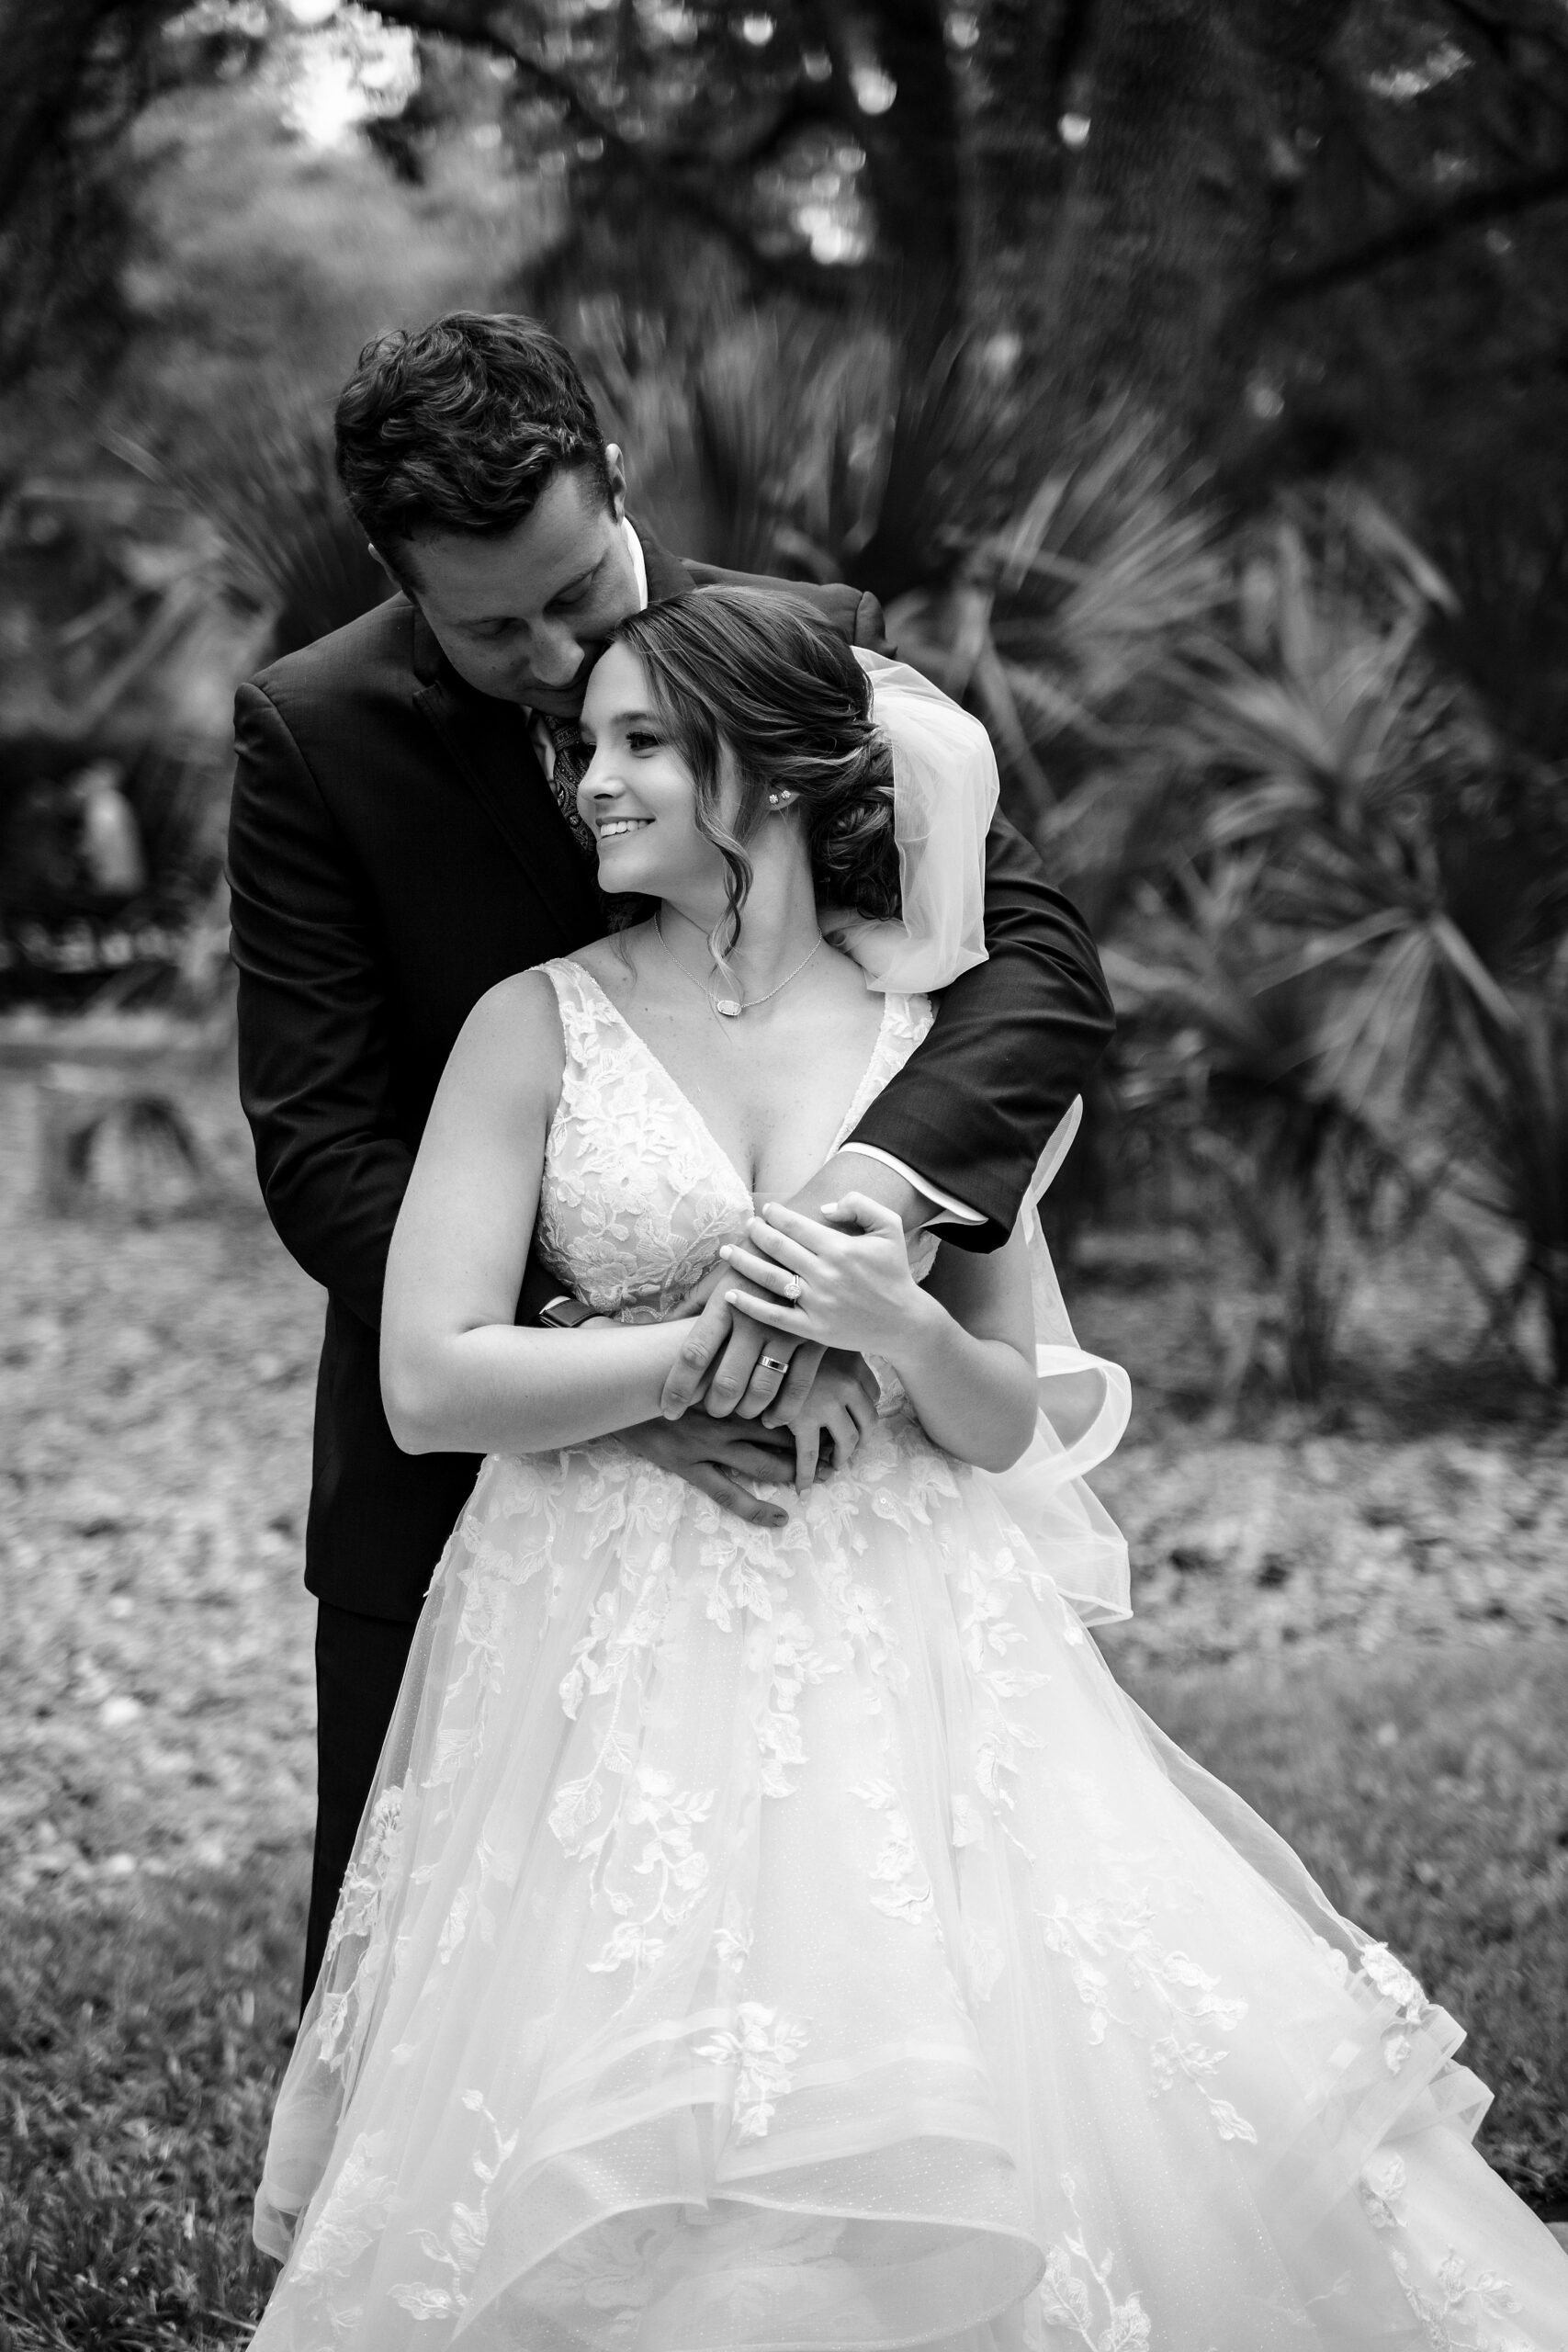 A groom hugs his bride from behind in a tropical garden while smiling